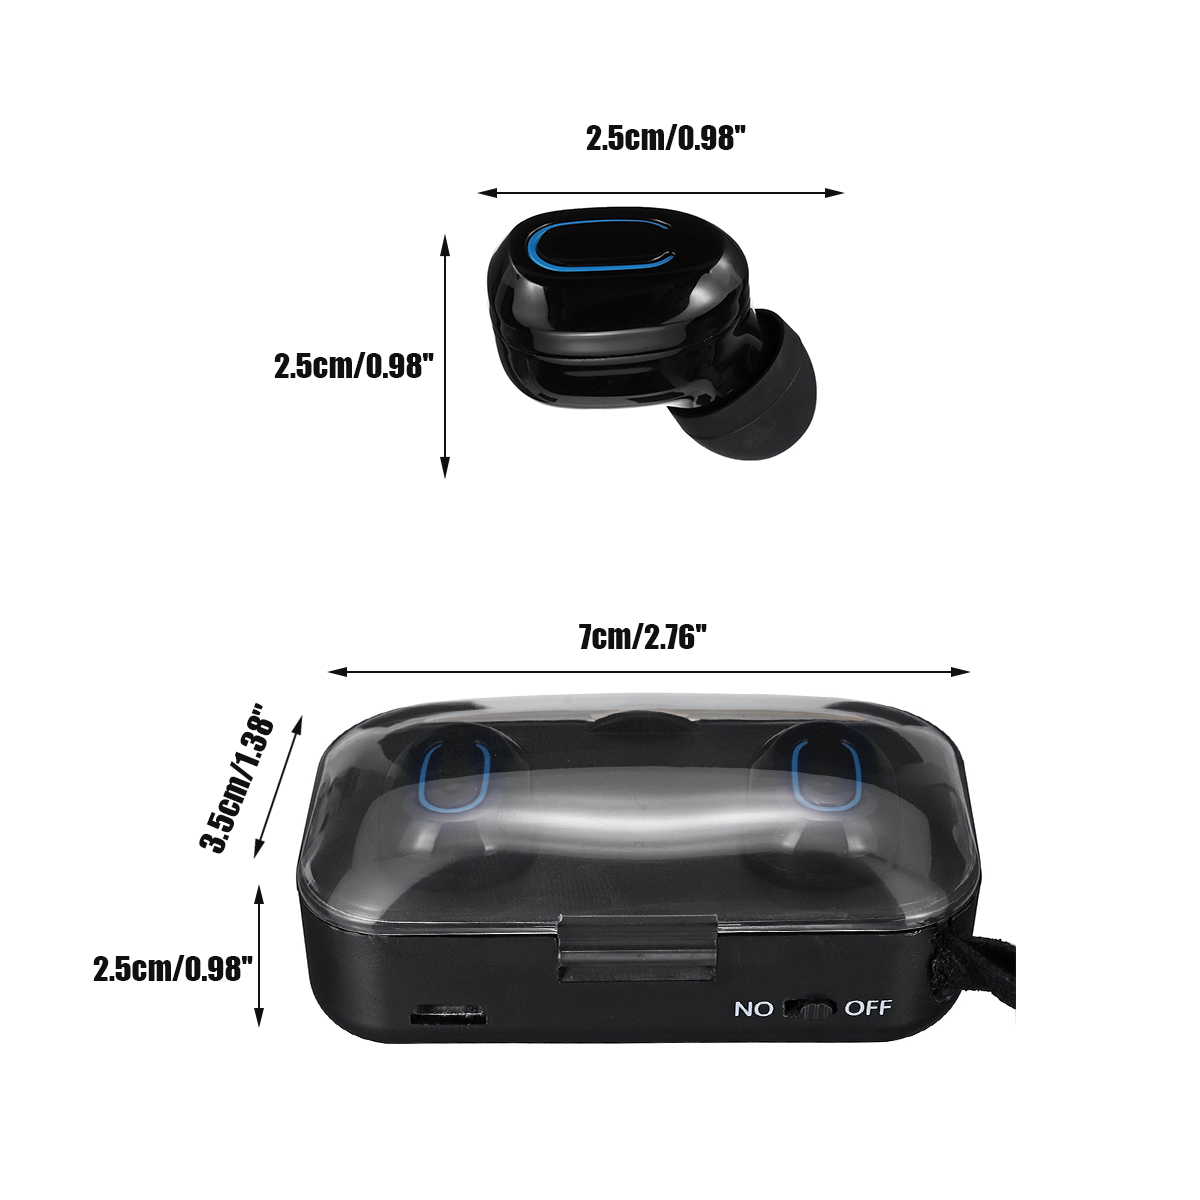 T18S-TWS-Wireless-Earbuds-bluetooth-50-Earphone-Mini-Portable-Stereo-Headphone-with-Mic-for-iPhone-H-1634992-10